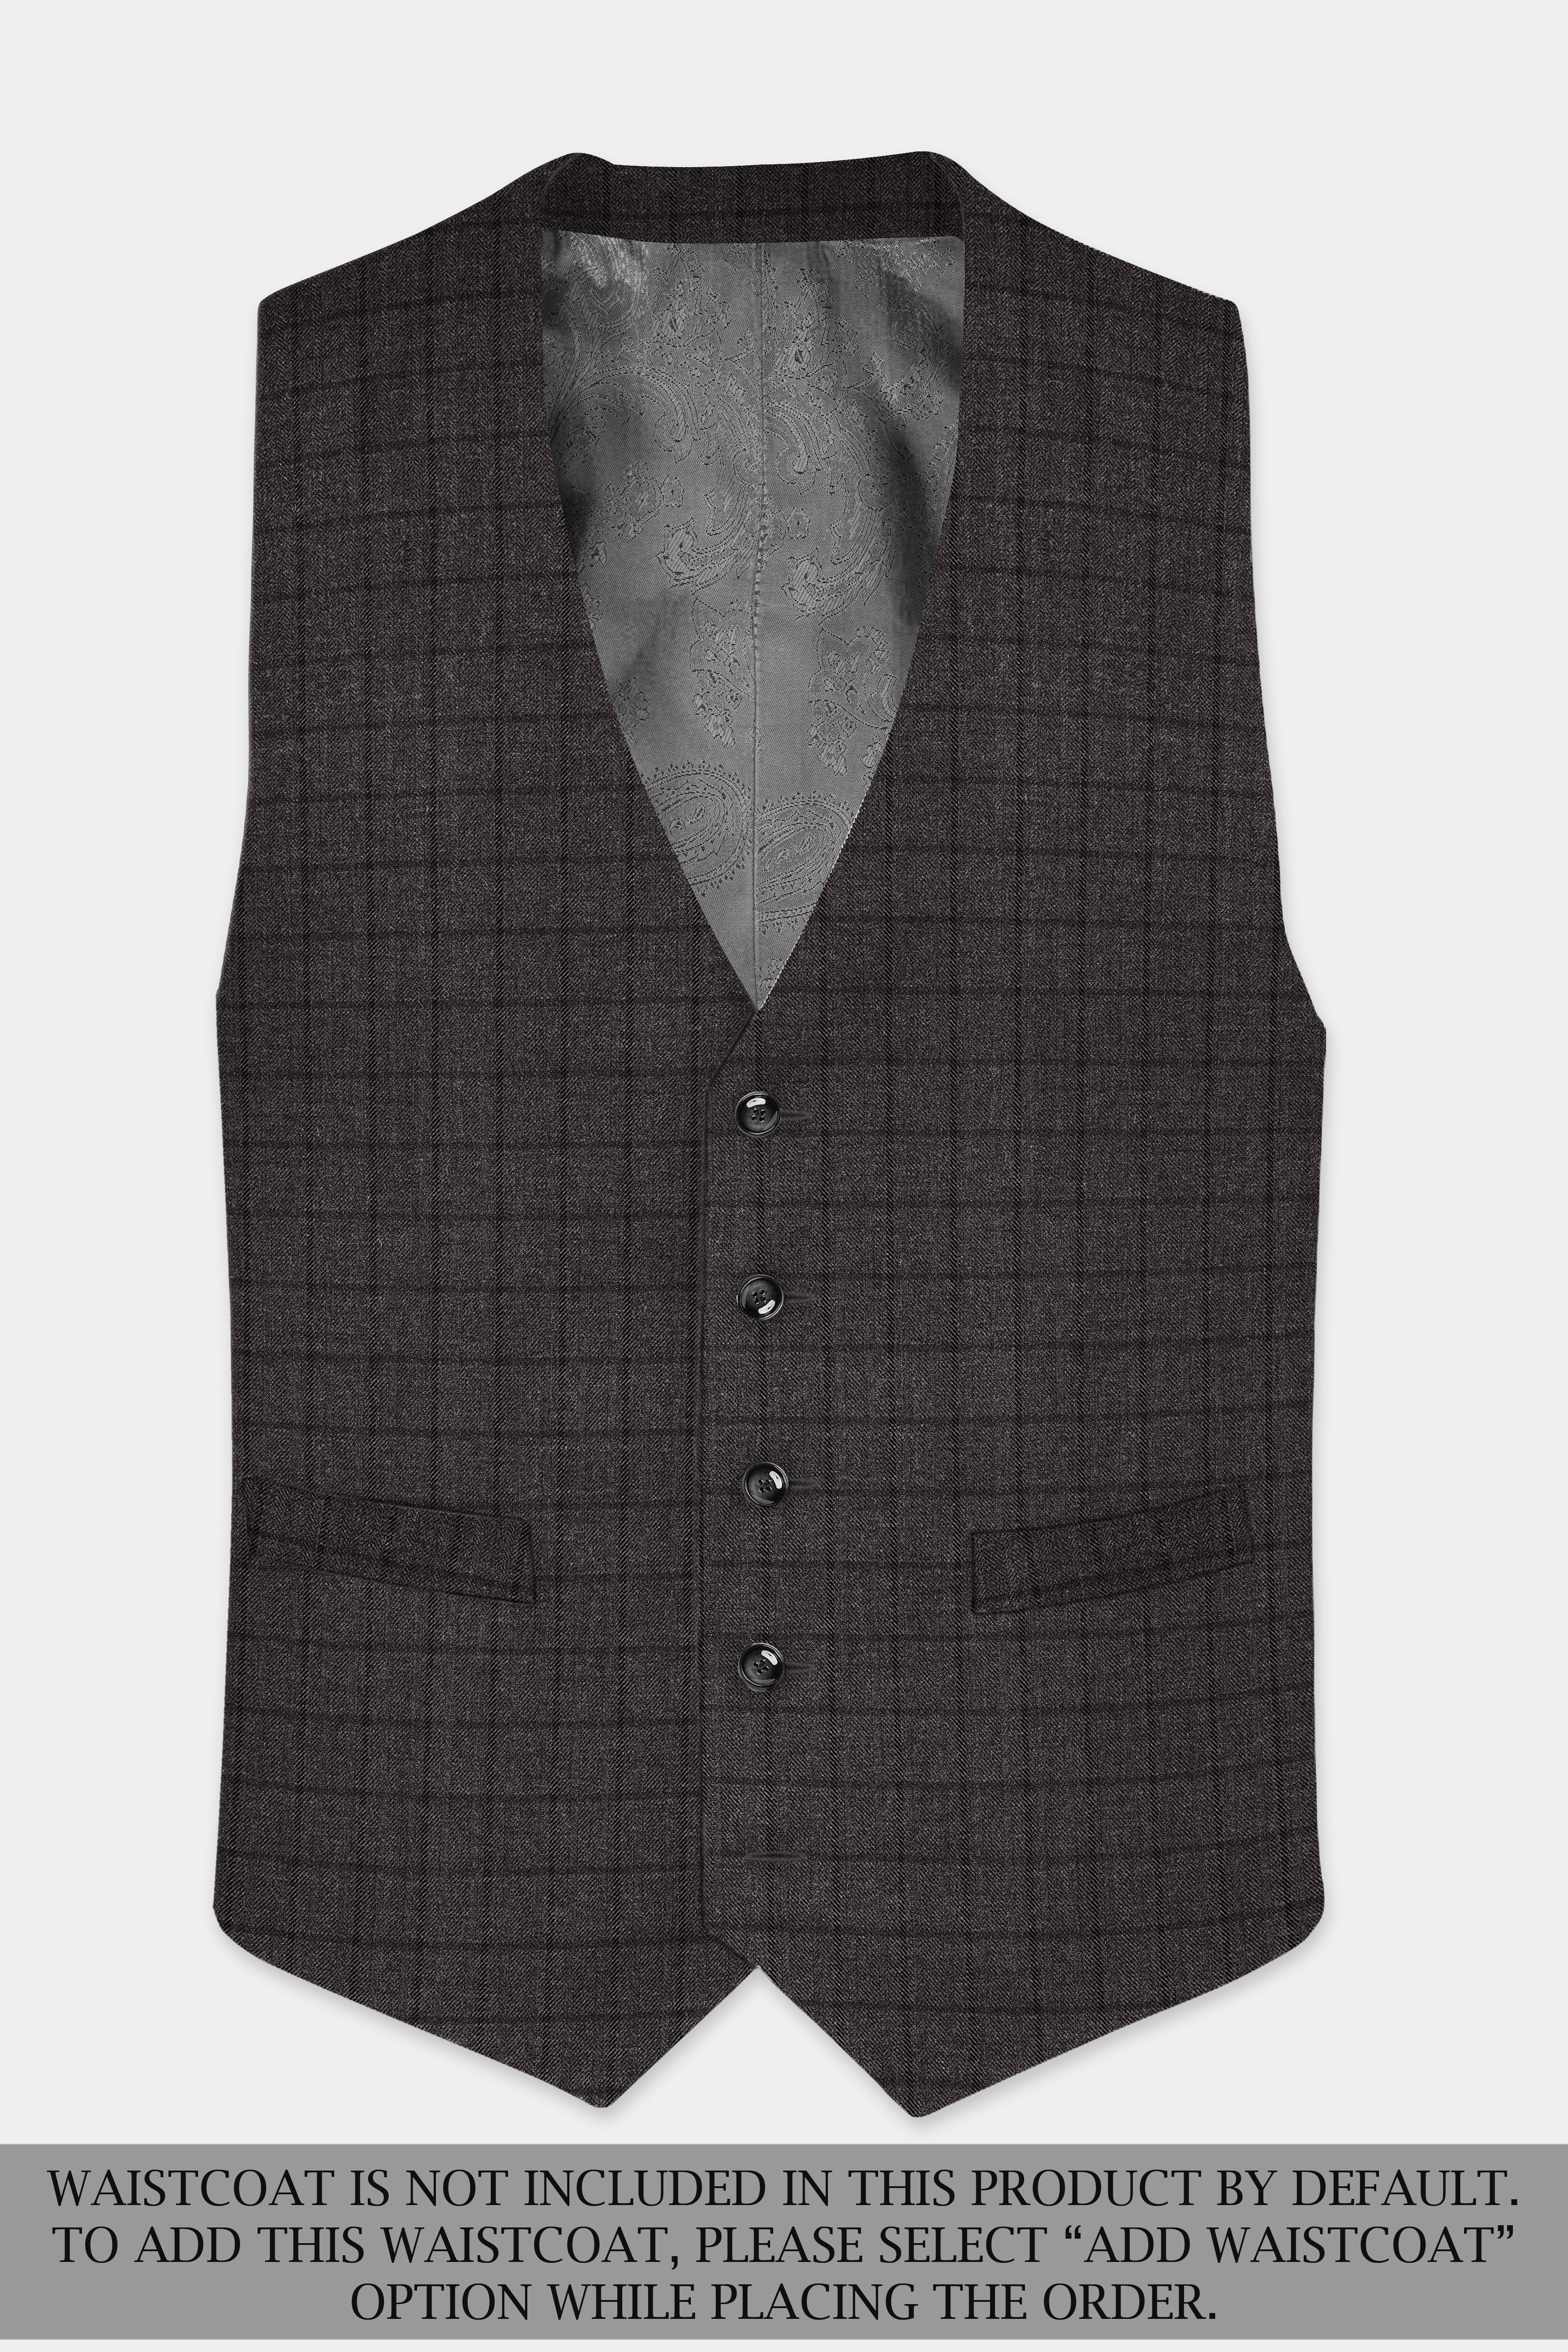 Thunder Gray Windowpane Tweed Double Breasted Suit